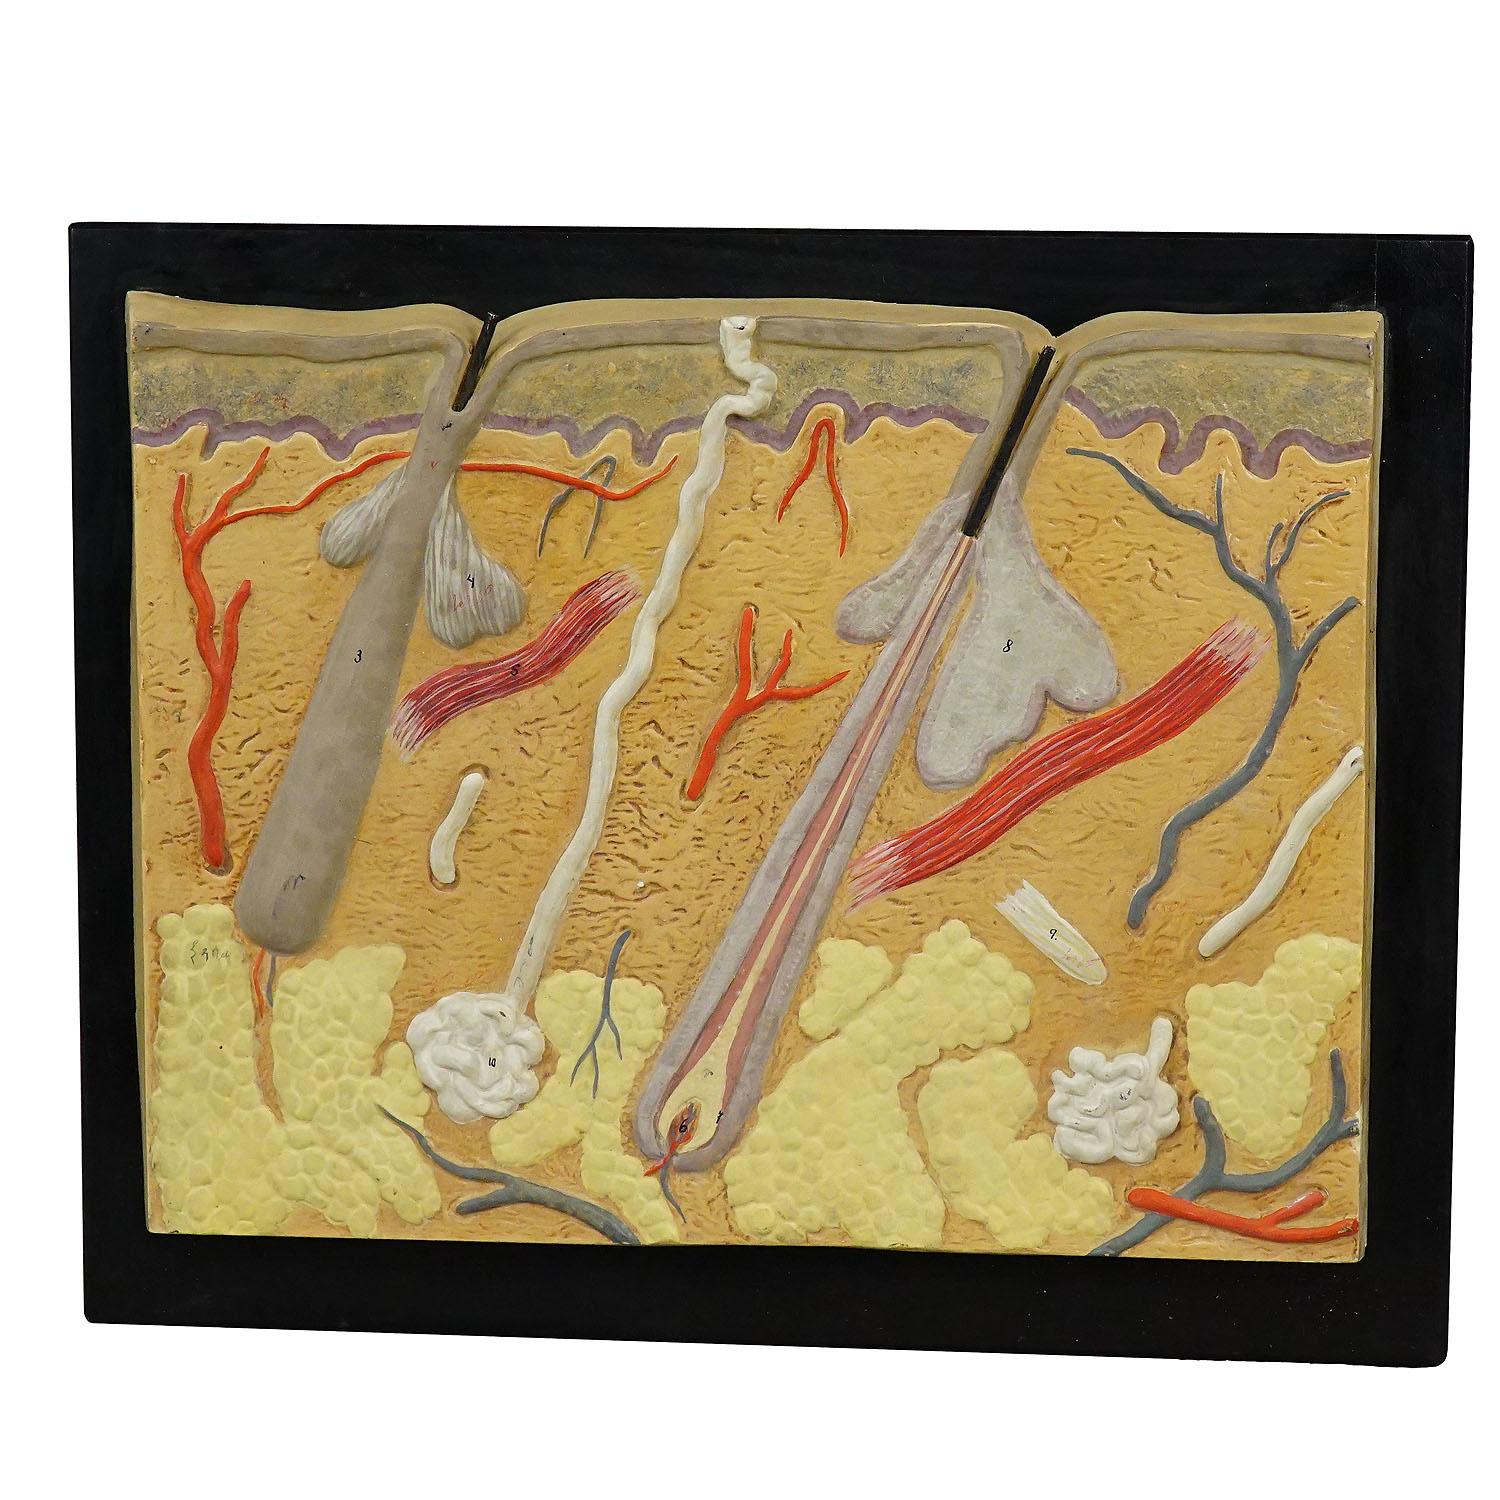 Antique Teaching Aid - Structure of the Human Skin, Plaster on Wood

An antique hand-painted anatomical wall model depicting the structure of the human skin with roots of the hair. The model is made of plaster on wooden plate. Most probably